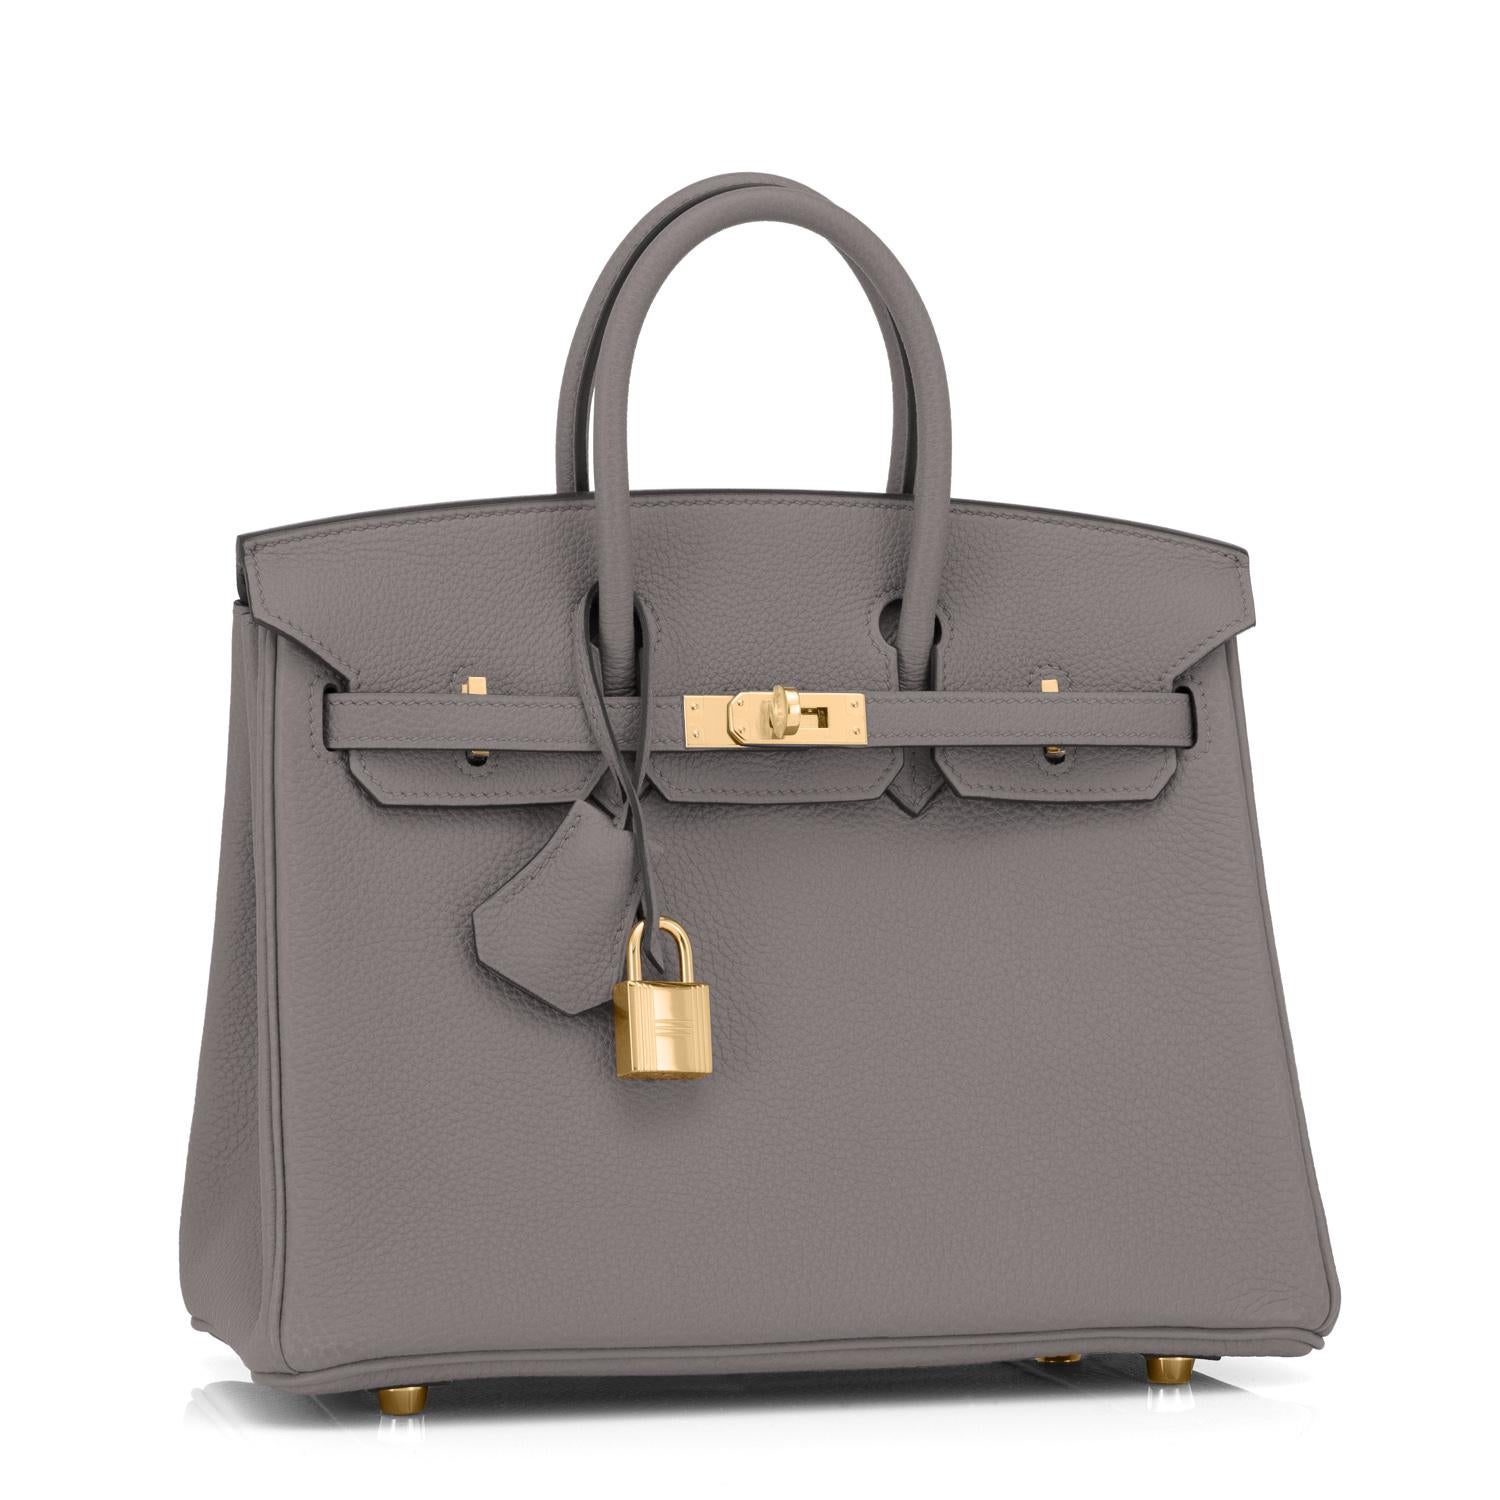 Hermes Birkin 25cm Etain Tin Grey Gold Hardware Bag Z Stamp, 2021
Just purchased from Hermes store; bag bears new interior 2021 Z Stamp.
Brand New in Box. Store fresh. Pristine Condition (with plastic on hardware)
Perfect gift! Comes with keys,